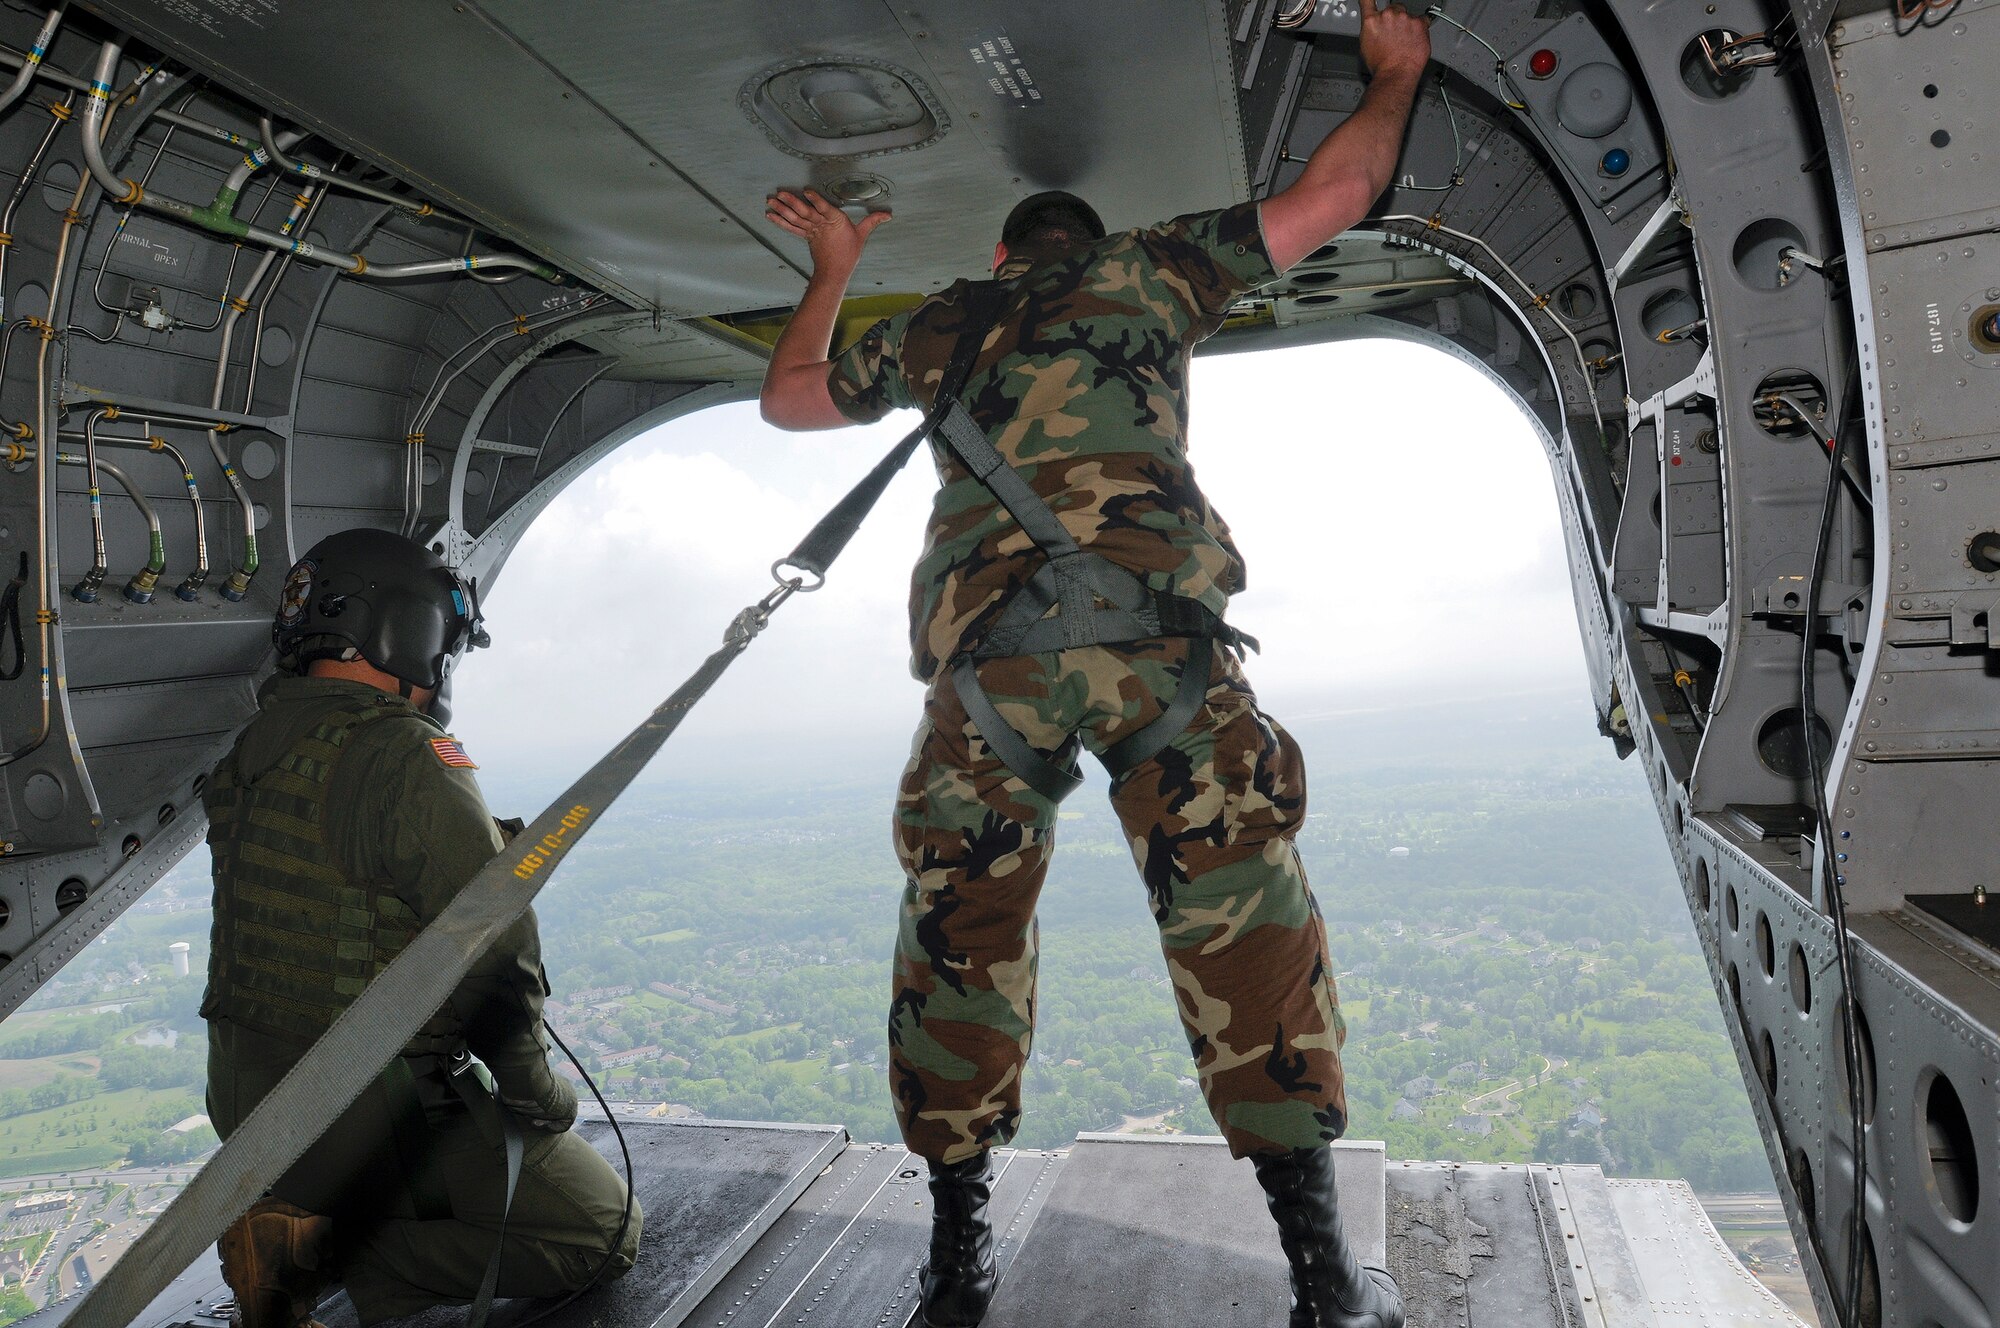 Staff Sgt. Christopher K. Spencer, 270th Engineering Installation Sq. looks out the back of a CH-47 Chinook helicopter on his way to take part in an A-10 live fire and combat search and rescue (CSAR) demonstration at Bollen Air-to-Ground Weapons Range, Fort Indiantown Gap, Pa. May 15.